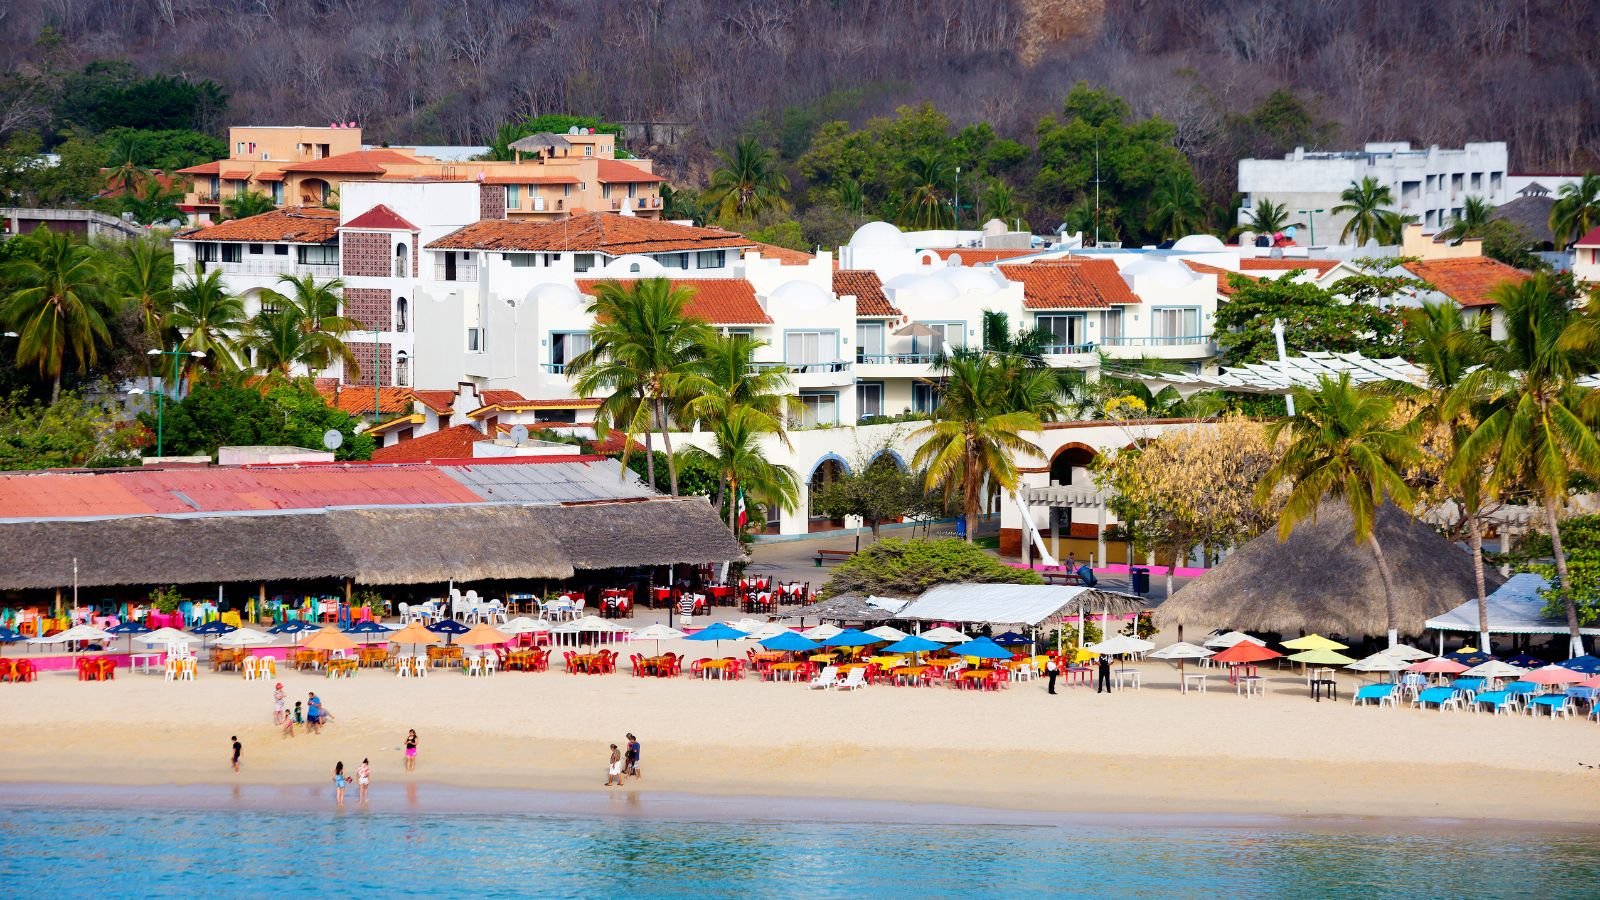 <p>Huatulco is a planned development by Fonatur and has over 55,000 residents including <a href="https://internationalliving.com/best-places-live-mexico-u-s-expat/#:~:text=Huatulco%3A%20A%20Hidden%20Gem%20in%20Southern%20Mexico,-%C2%A9iStock%2FUser10095428_393&text=There%20are%20only%20about%2056%2C000,from%20Canada%20spend%20winters%20here." rel="noopener">around 1,000 expats</a> and part-time visitors. The city is divided into three main areas- La Crucecita which is a commercial center, Santa Cruz which is a marina area, and Chahué which is a residential seaside. Despite its small size, Huatulco boasts an international airport with direct flights to the U.K., U.S., and Canada.</p>